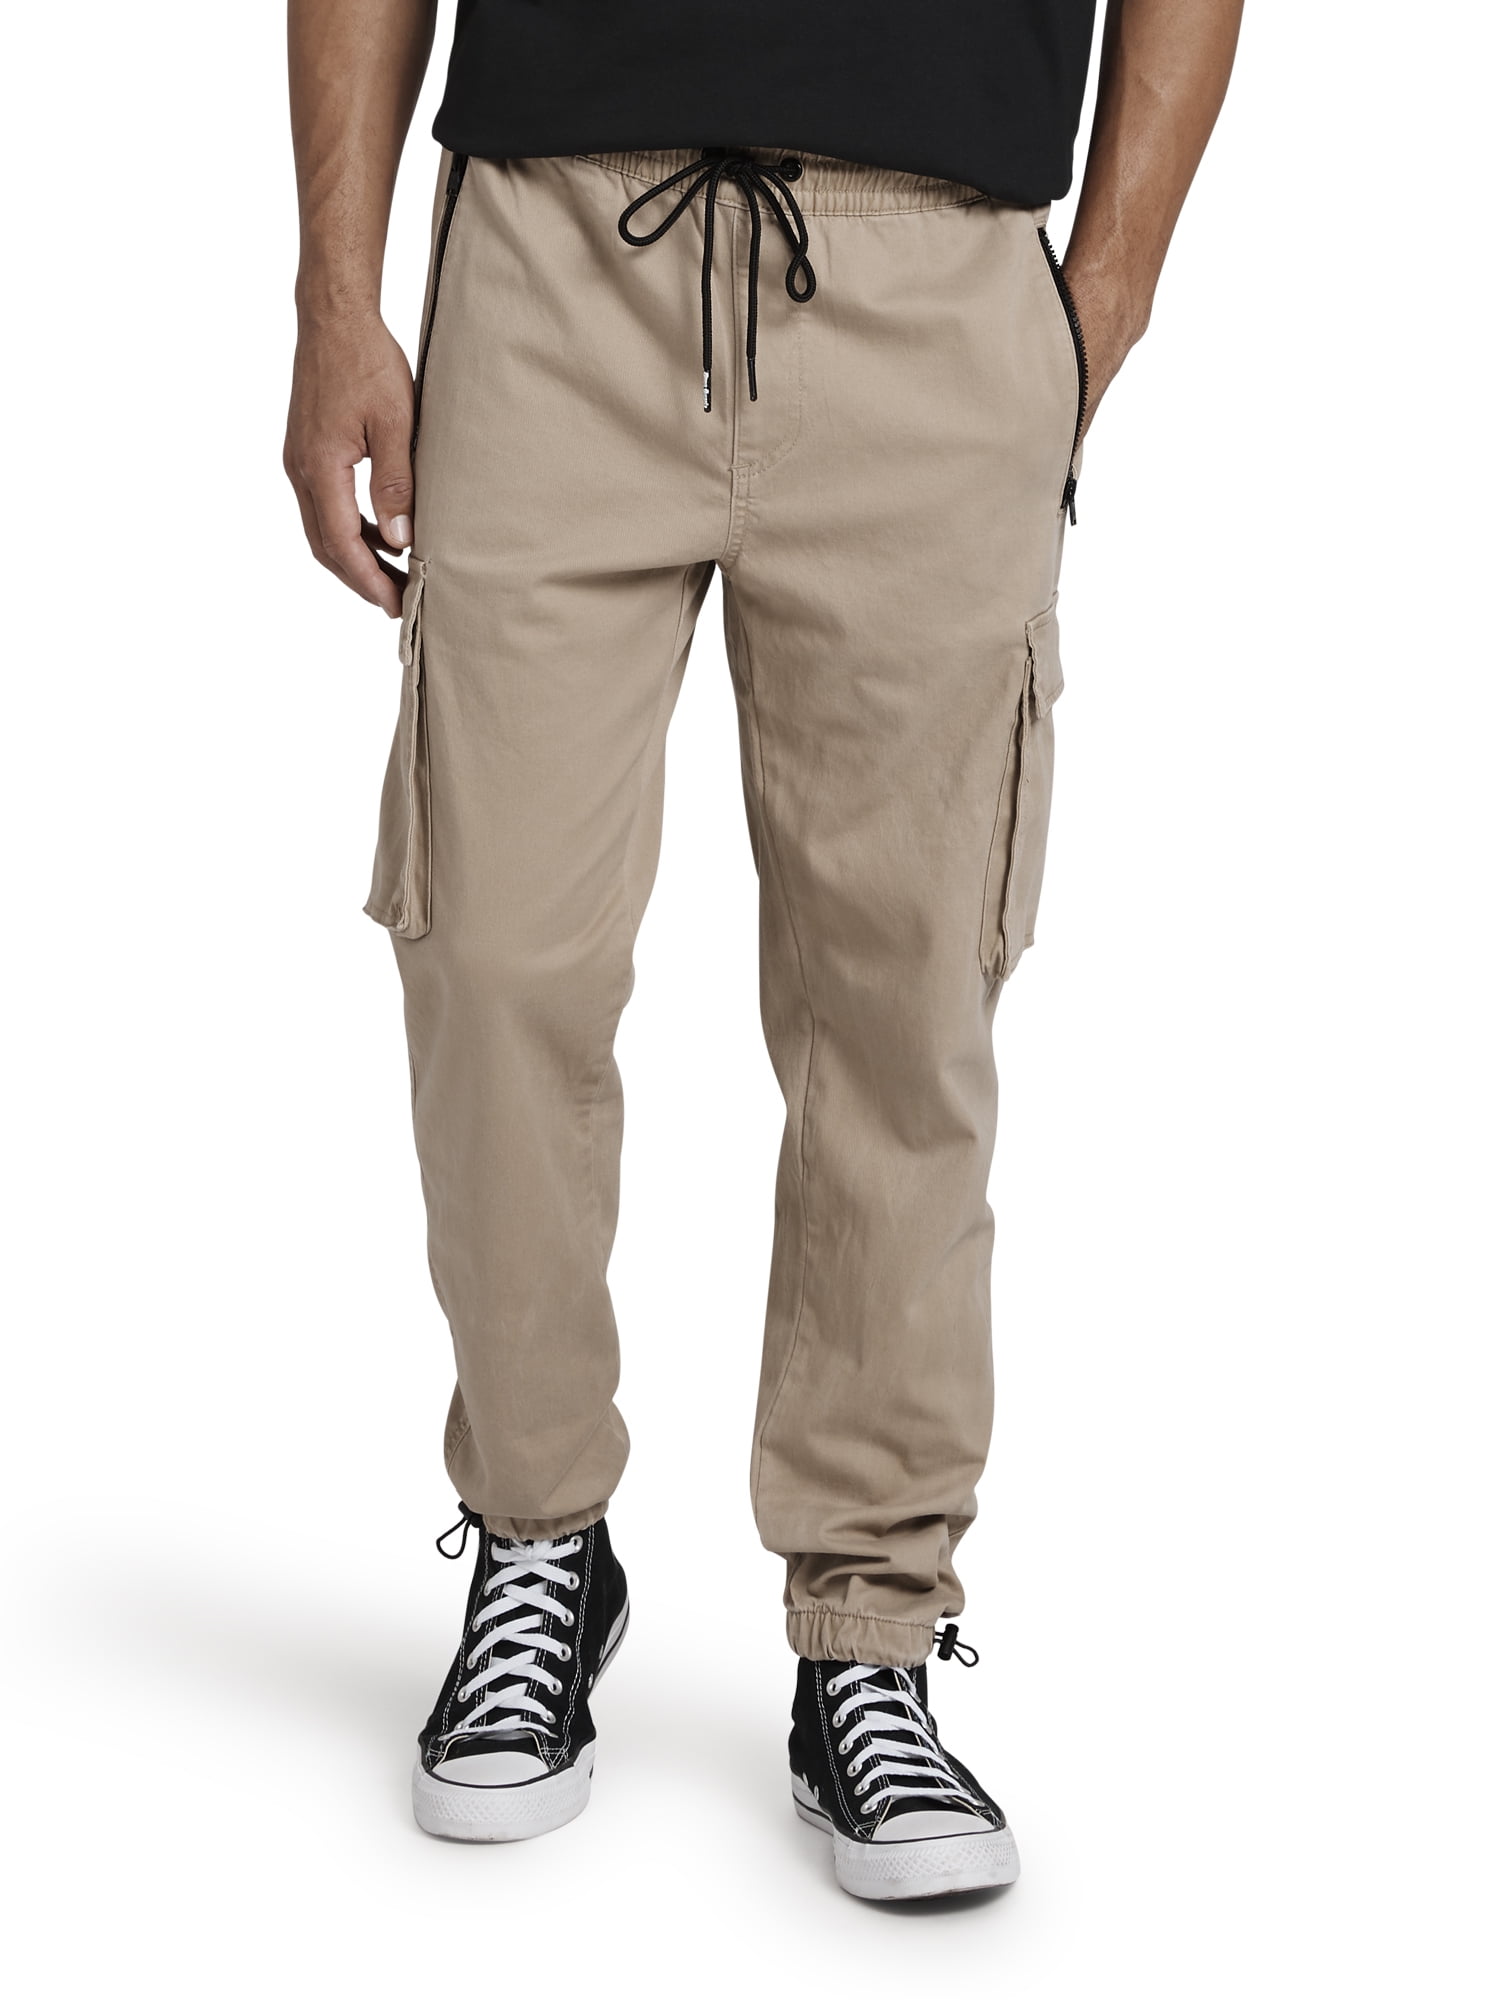 Dogg Supply by Snoop Dogg Men's and Big Men's Bungee Cargo Pants, Sizes  XS-3XL 